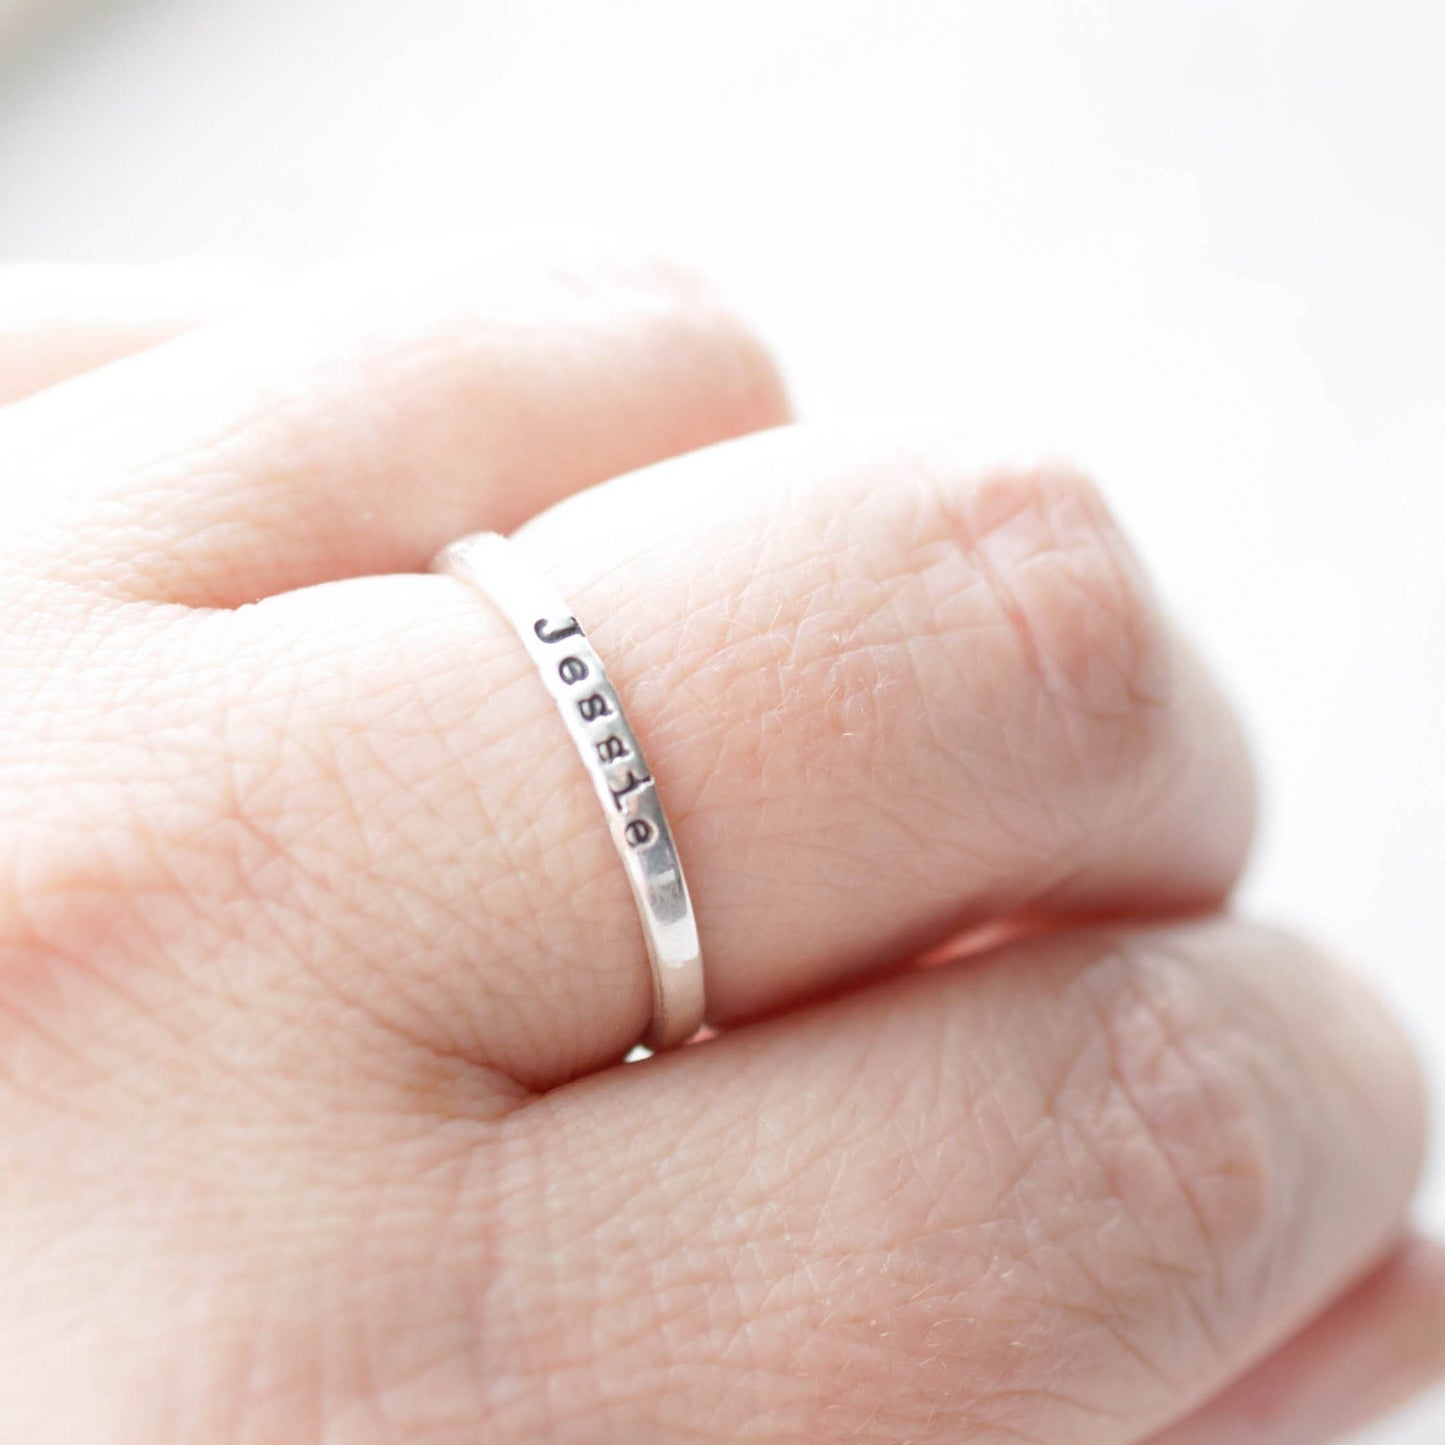 Sterling silver ring stamped with a personalized name on hand